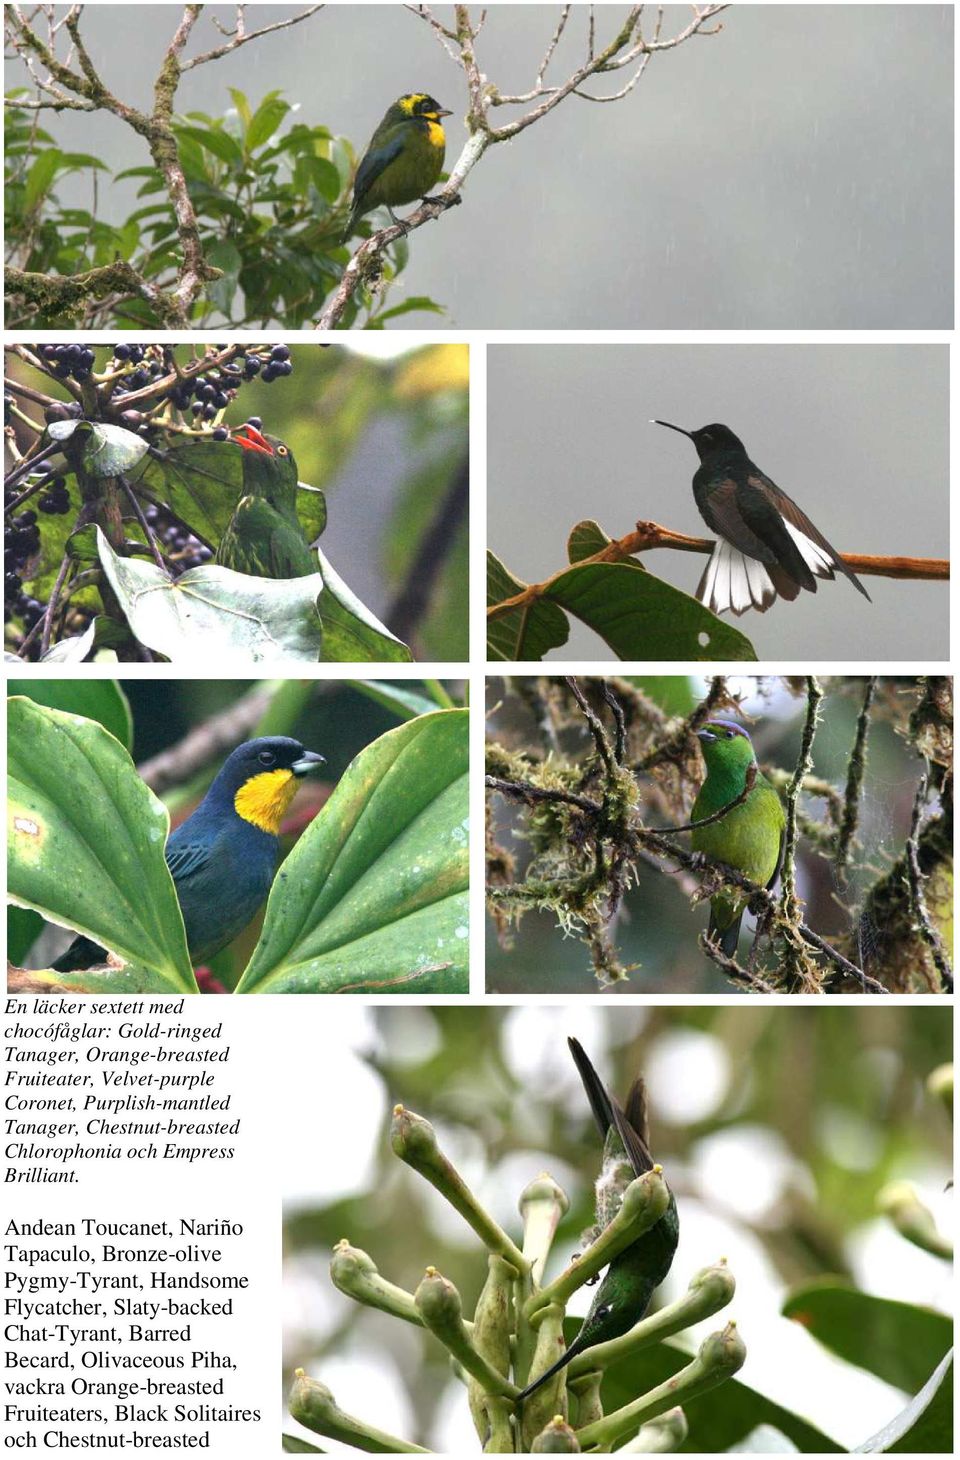 Andean Toucanet, Nariño Tapaculo, Bronze-olive Pygmy-Tyrant, Handsome Flycatcher, Slaty-backed